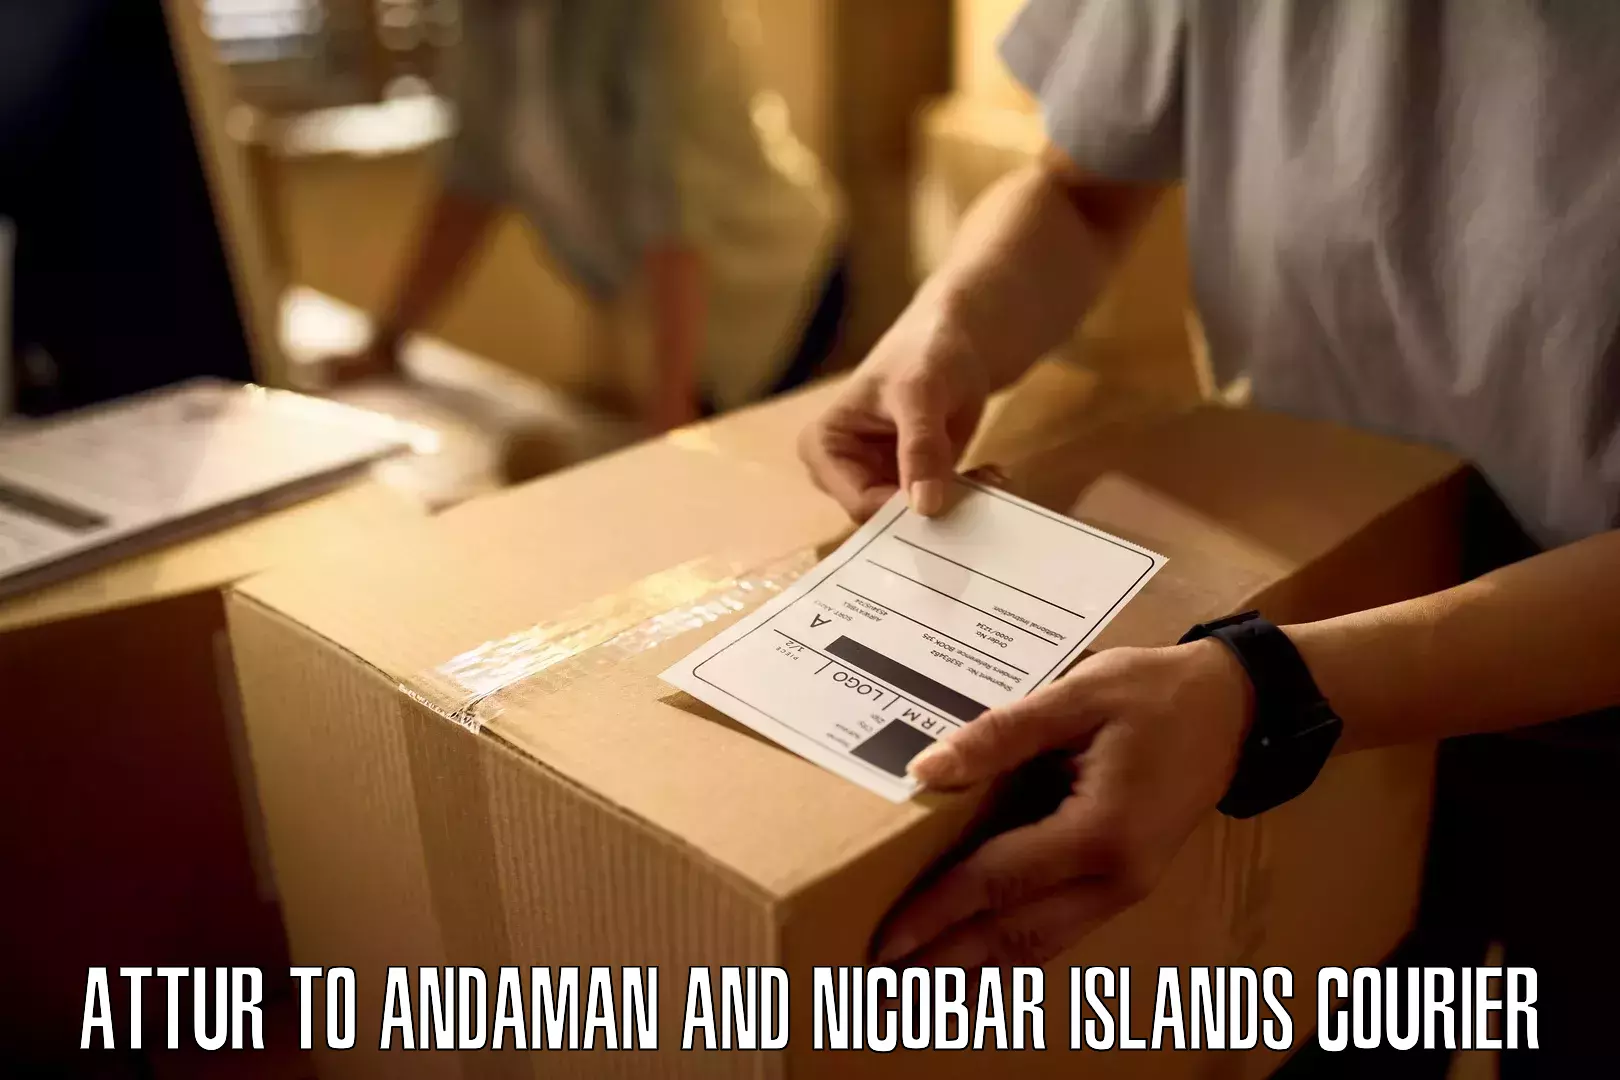 Cost-effective courier options Attur to Andaman and Nicobar Islands